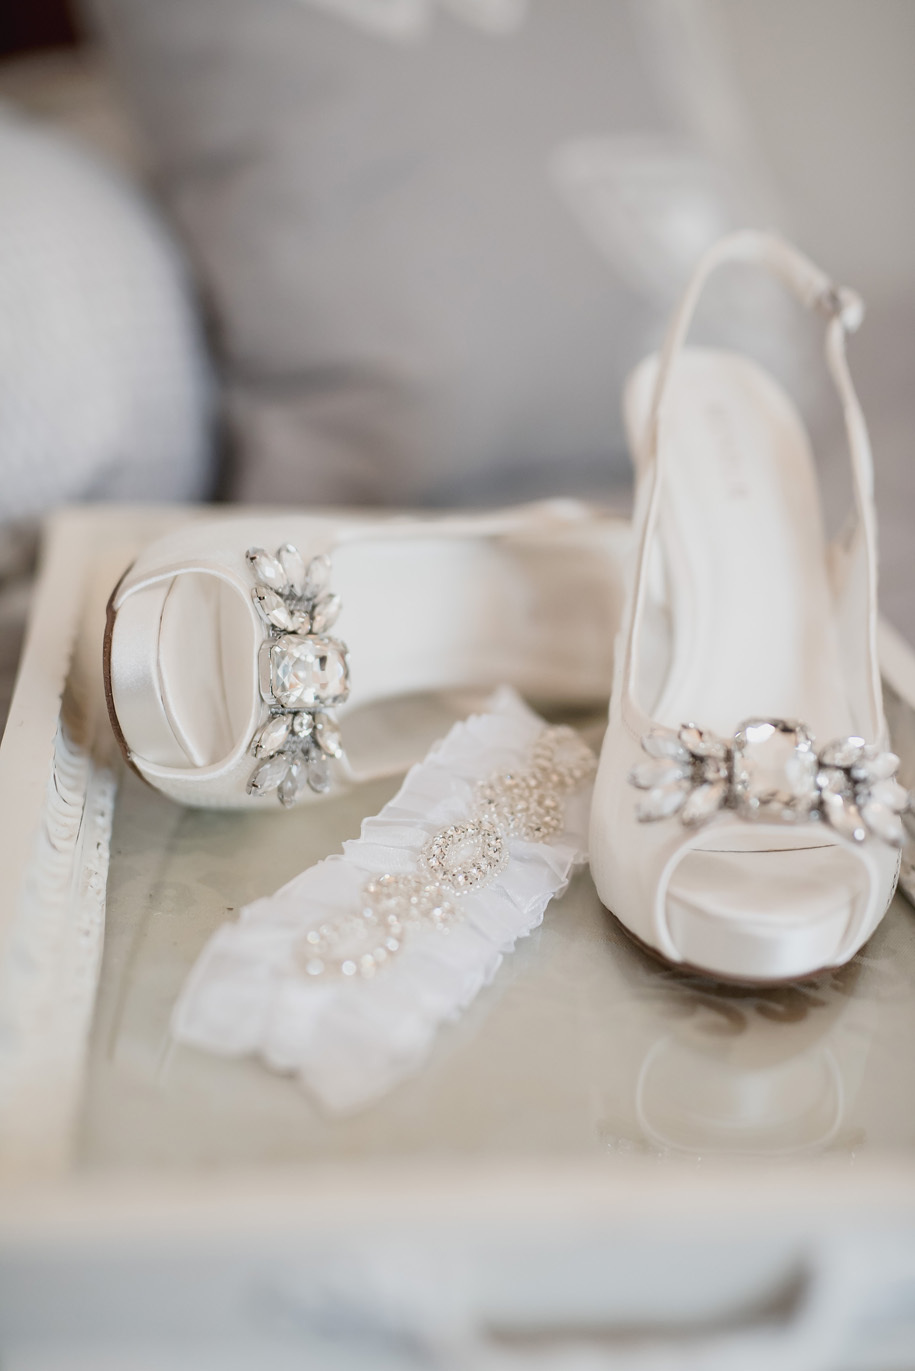 This bride's wedding day shoes are to die for! Cream satin sling back with crystal and gem accents. Love for a fall wedding in Michigan by Kari Dawson